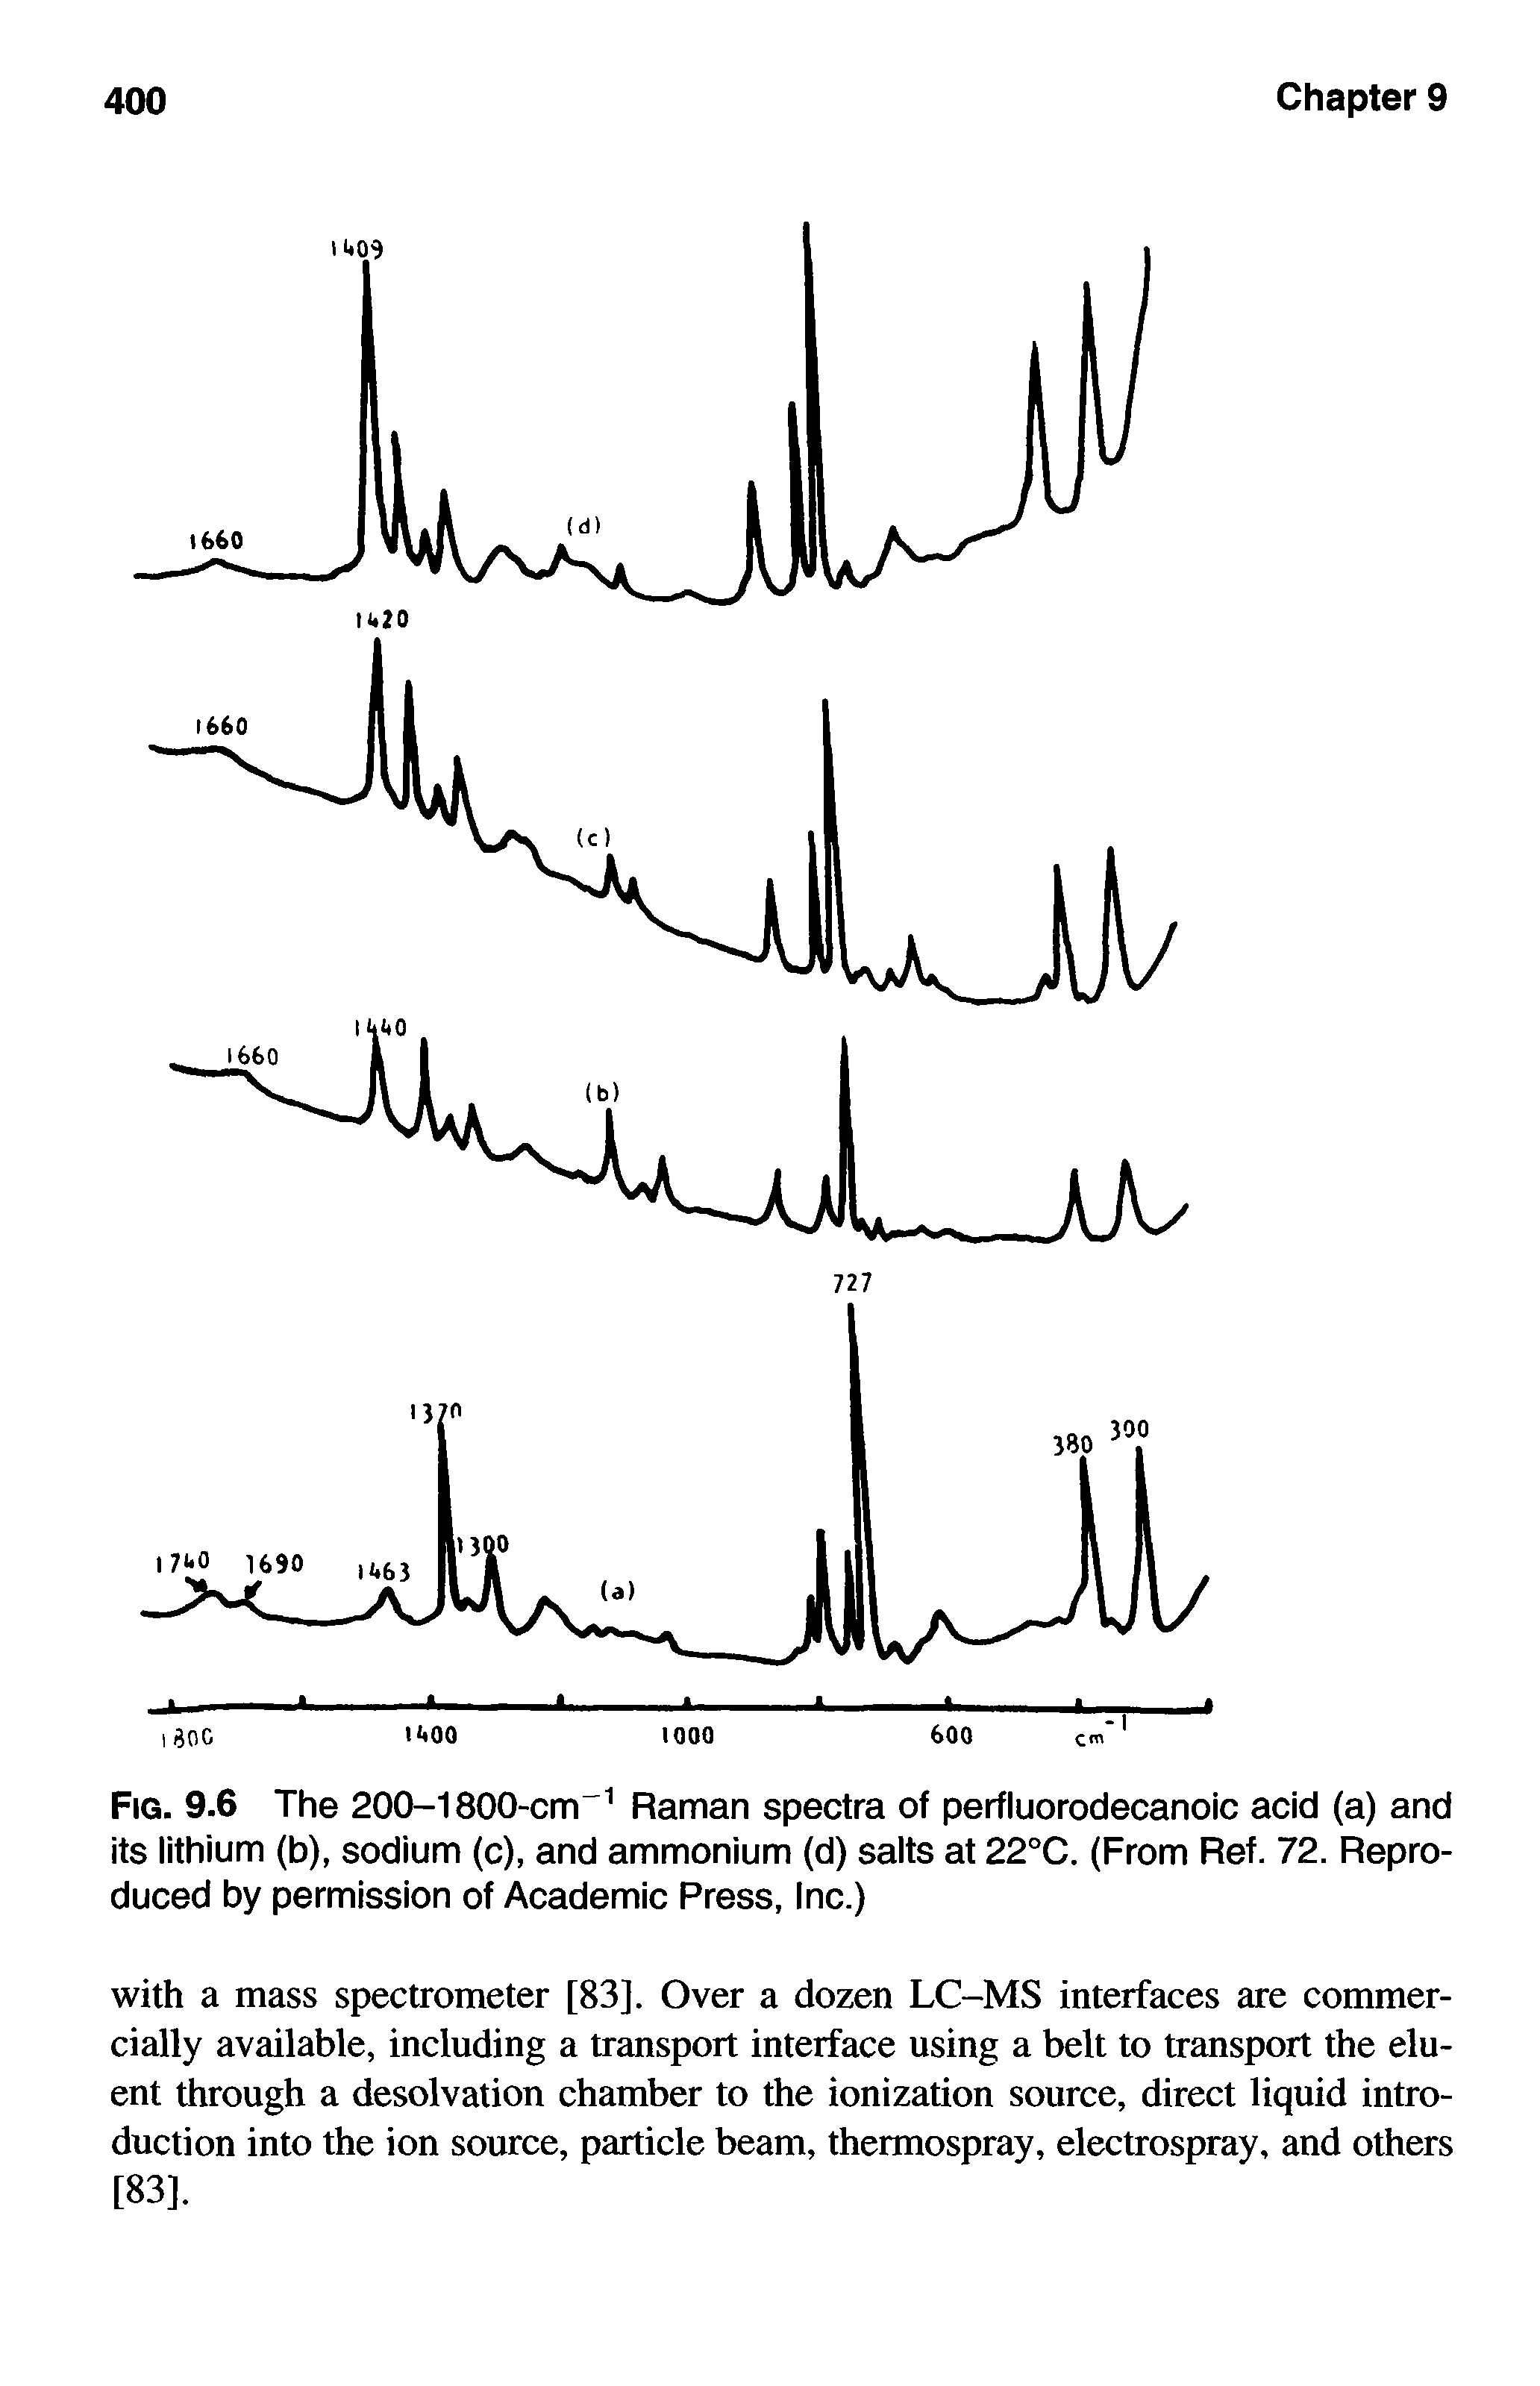 Fig. 9.6 The 200-1800-cm Raman spectra of perfluorodecanoic acid (a) and its lithium (b), sodium (c), and ammonium (d) salts at 22°C. (From Ref. 72. Reproduced by permission of Academic Press, Inc.)...